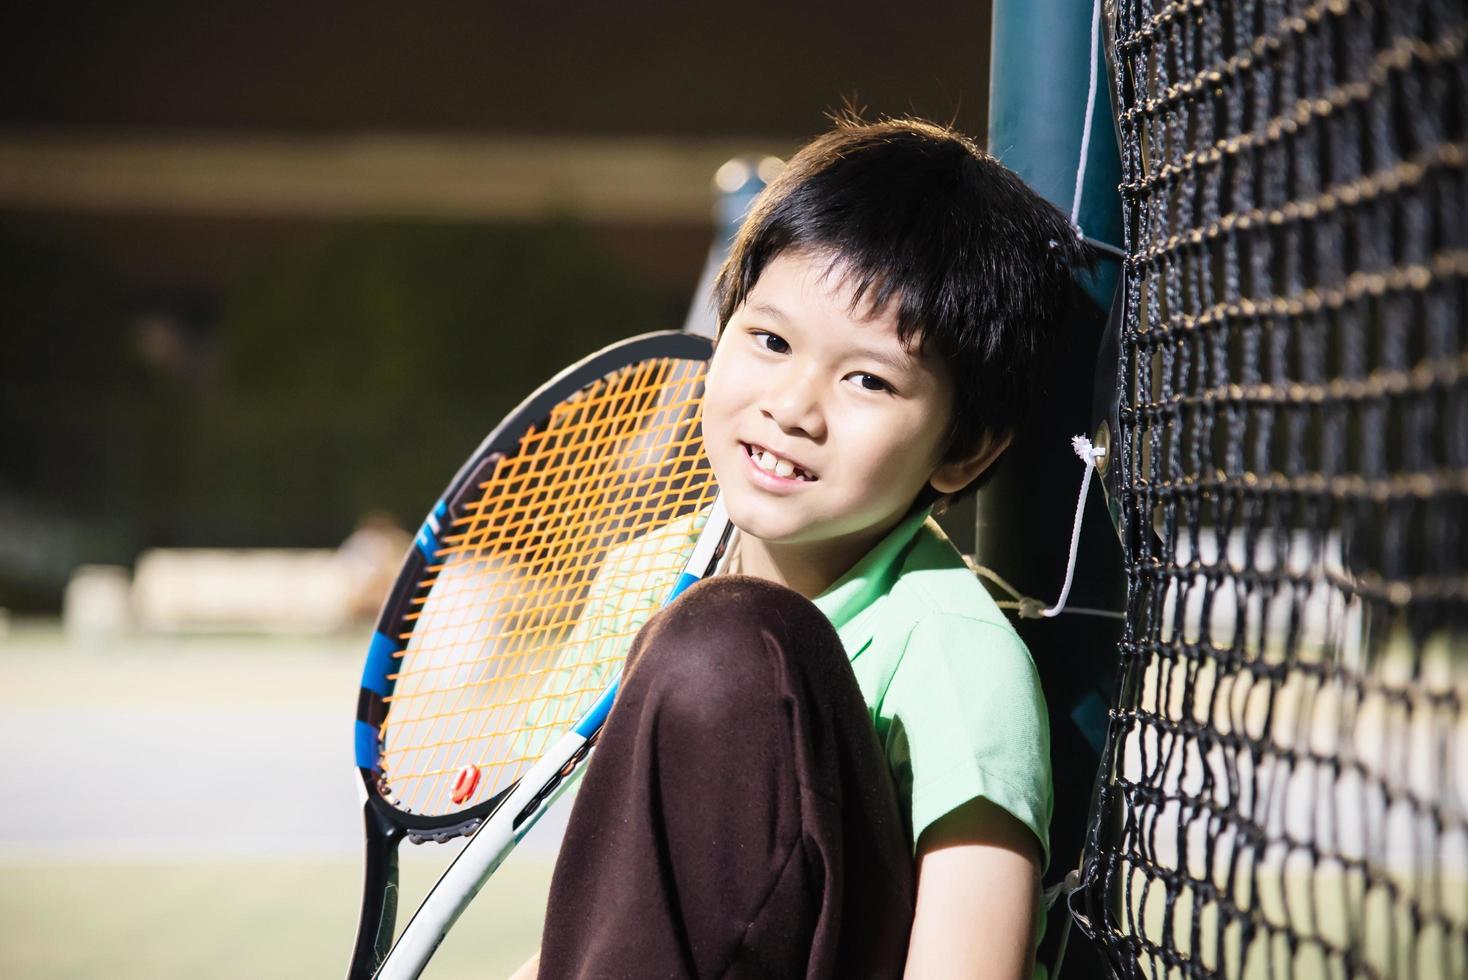 Happy boy in tennis court during his practise sport time - tennis sport with people concept photo